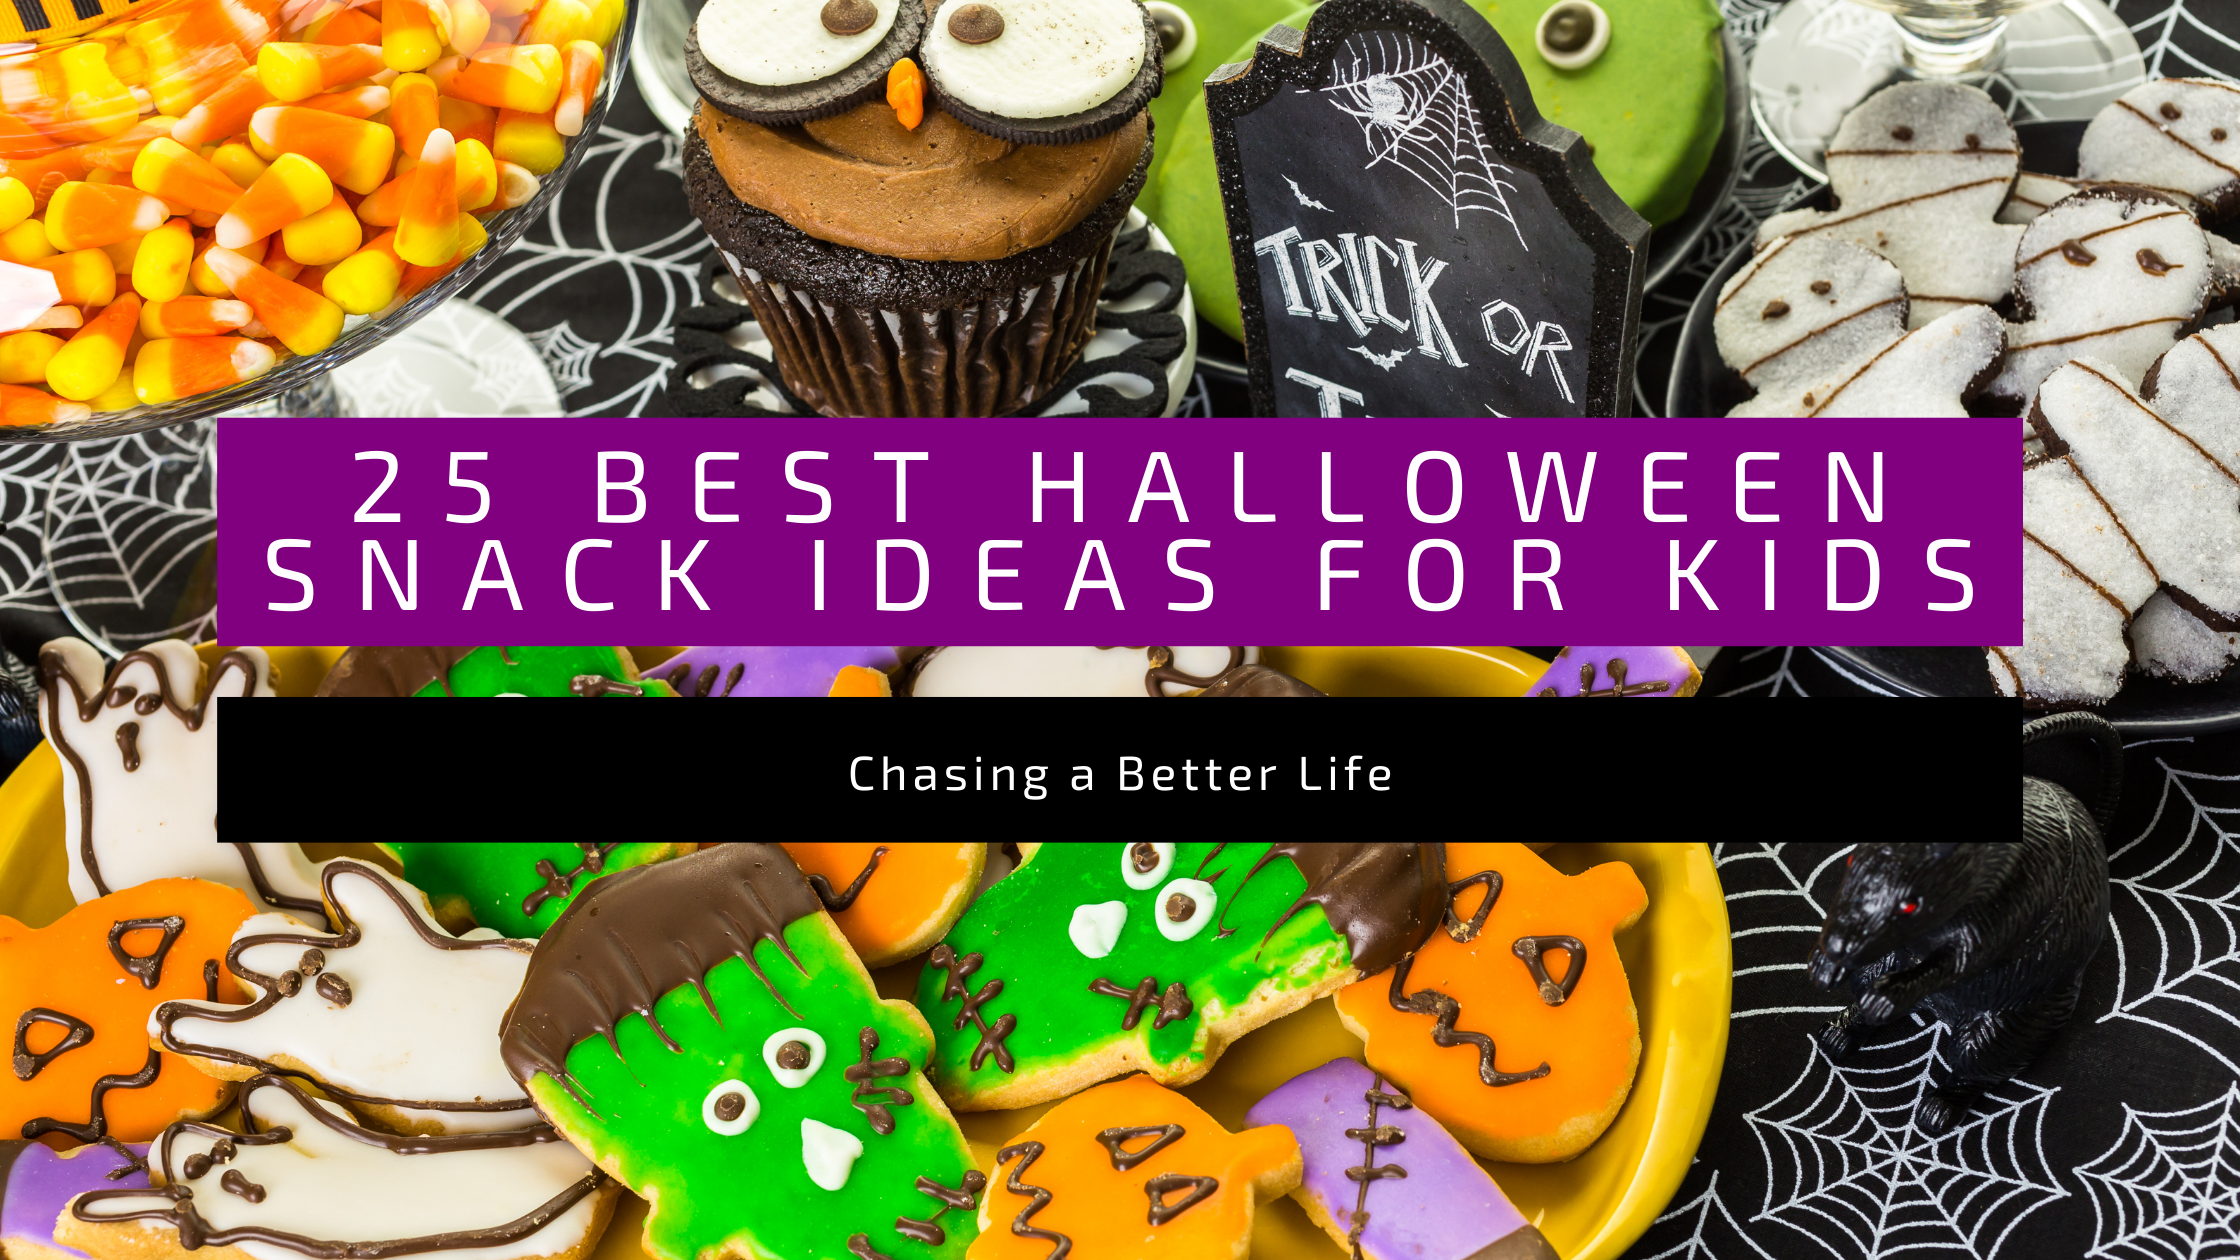 The 25 Best Halloween Snack Ideas for Kids 14